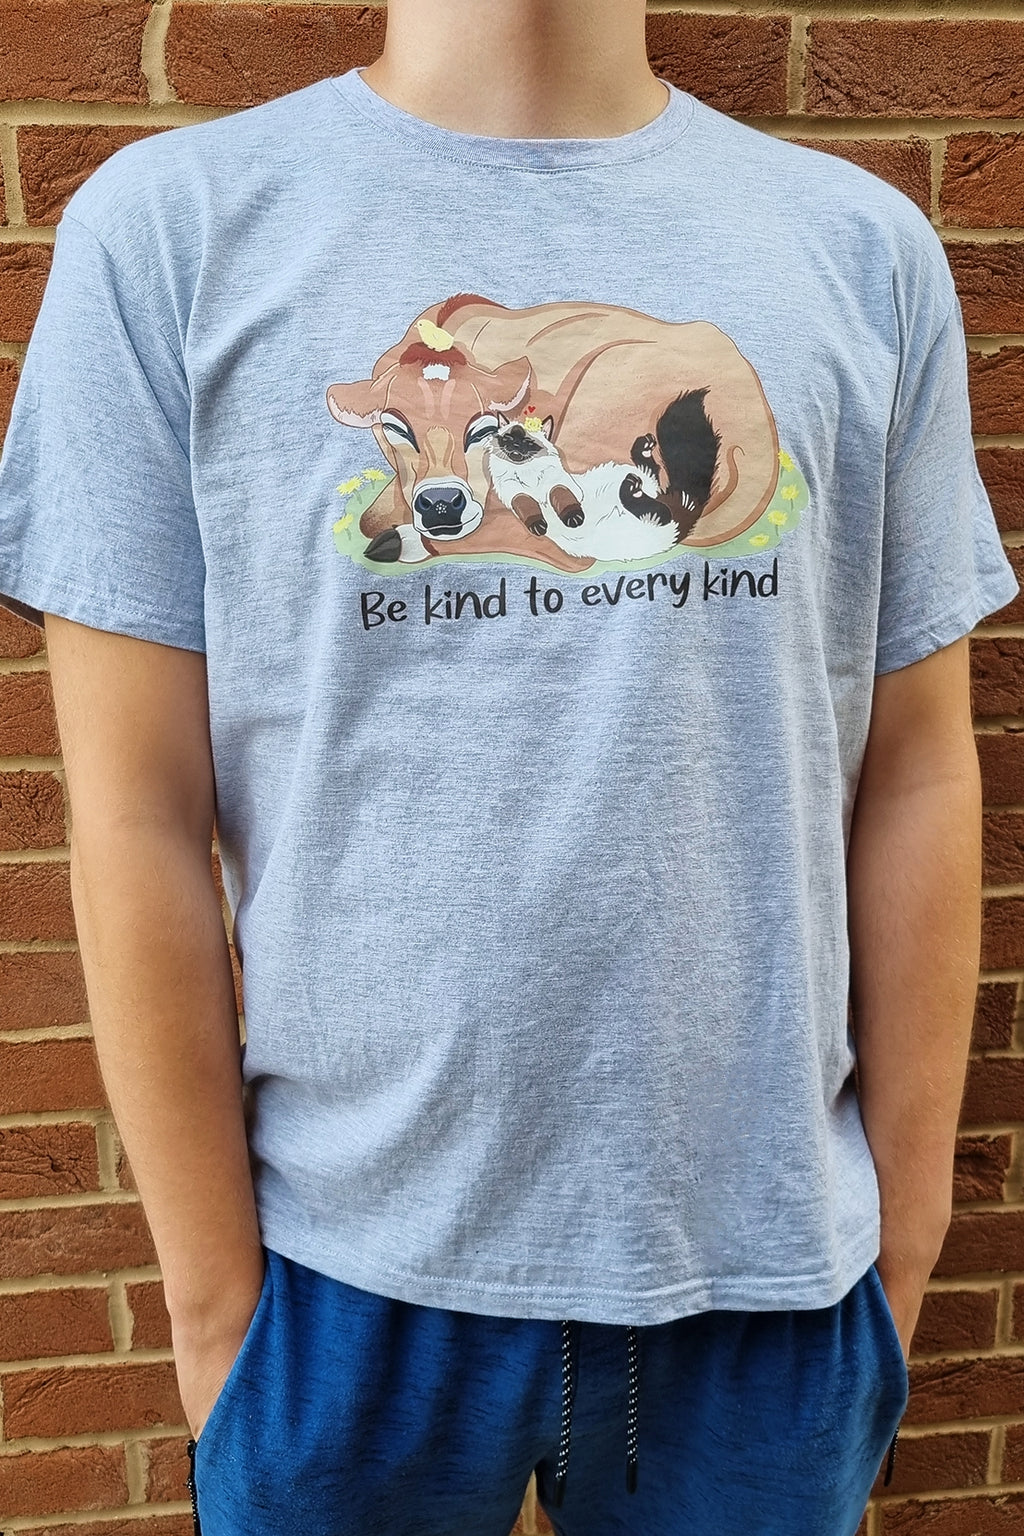 This tee is part of our vegan clothing range and brings awareness to our animal rescue's main goal which is animal welfare.